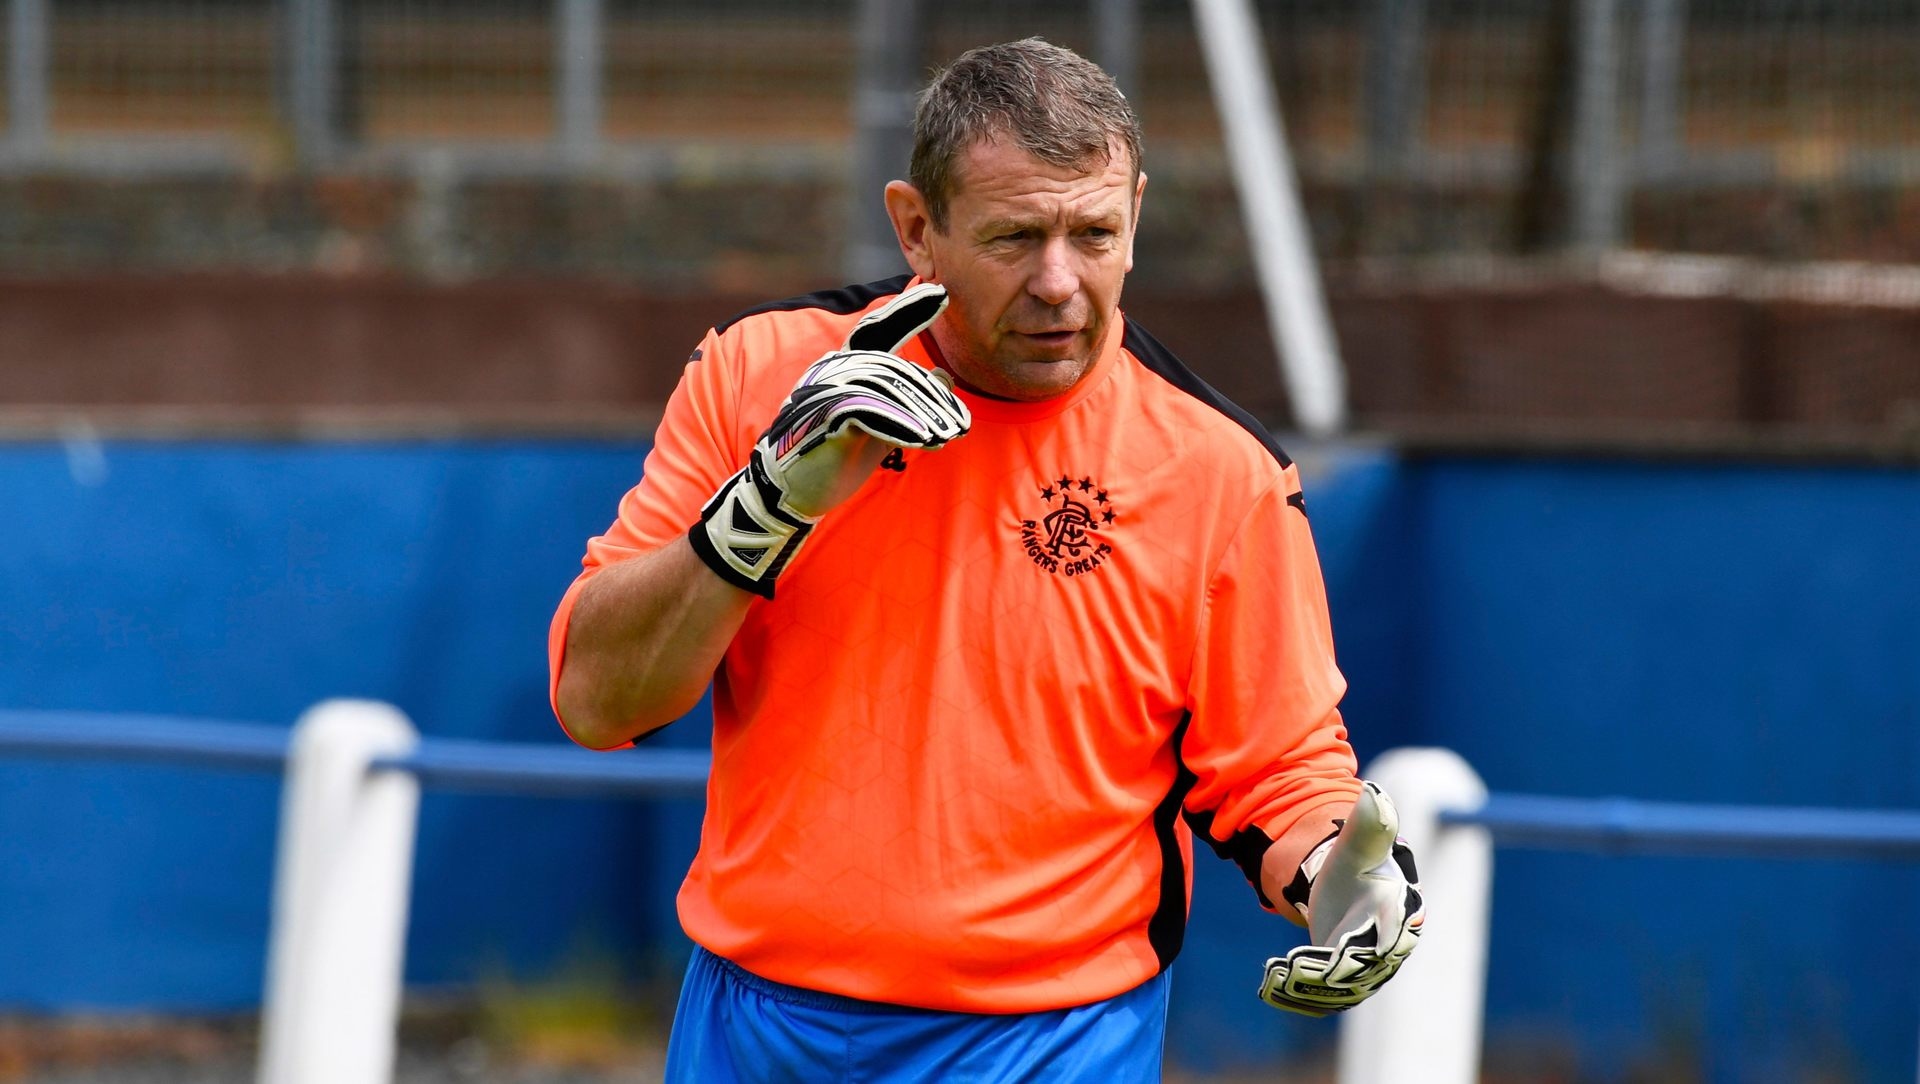 Goram in 2018 at a Celtic v Rangers Old Firm all stars charity match. 